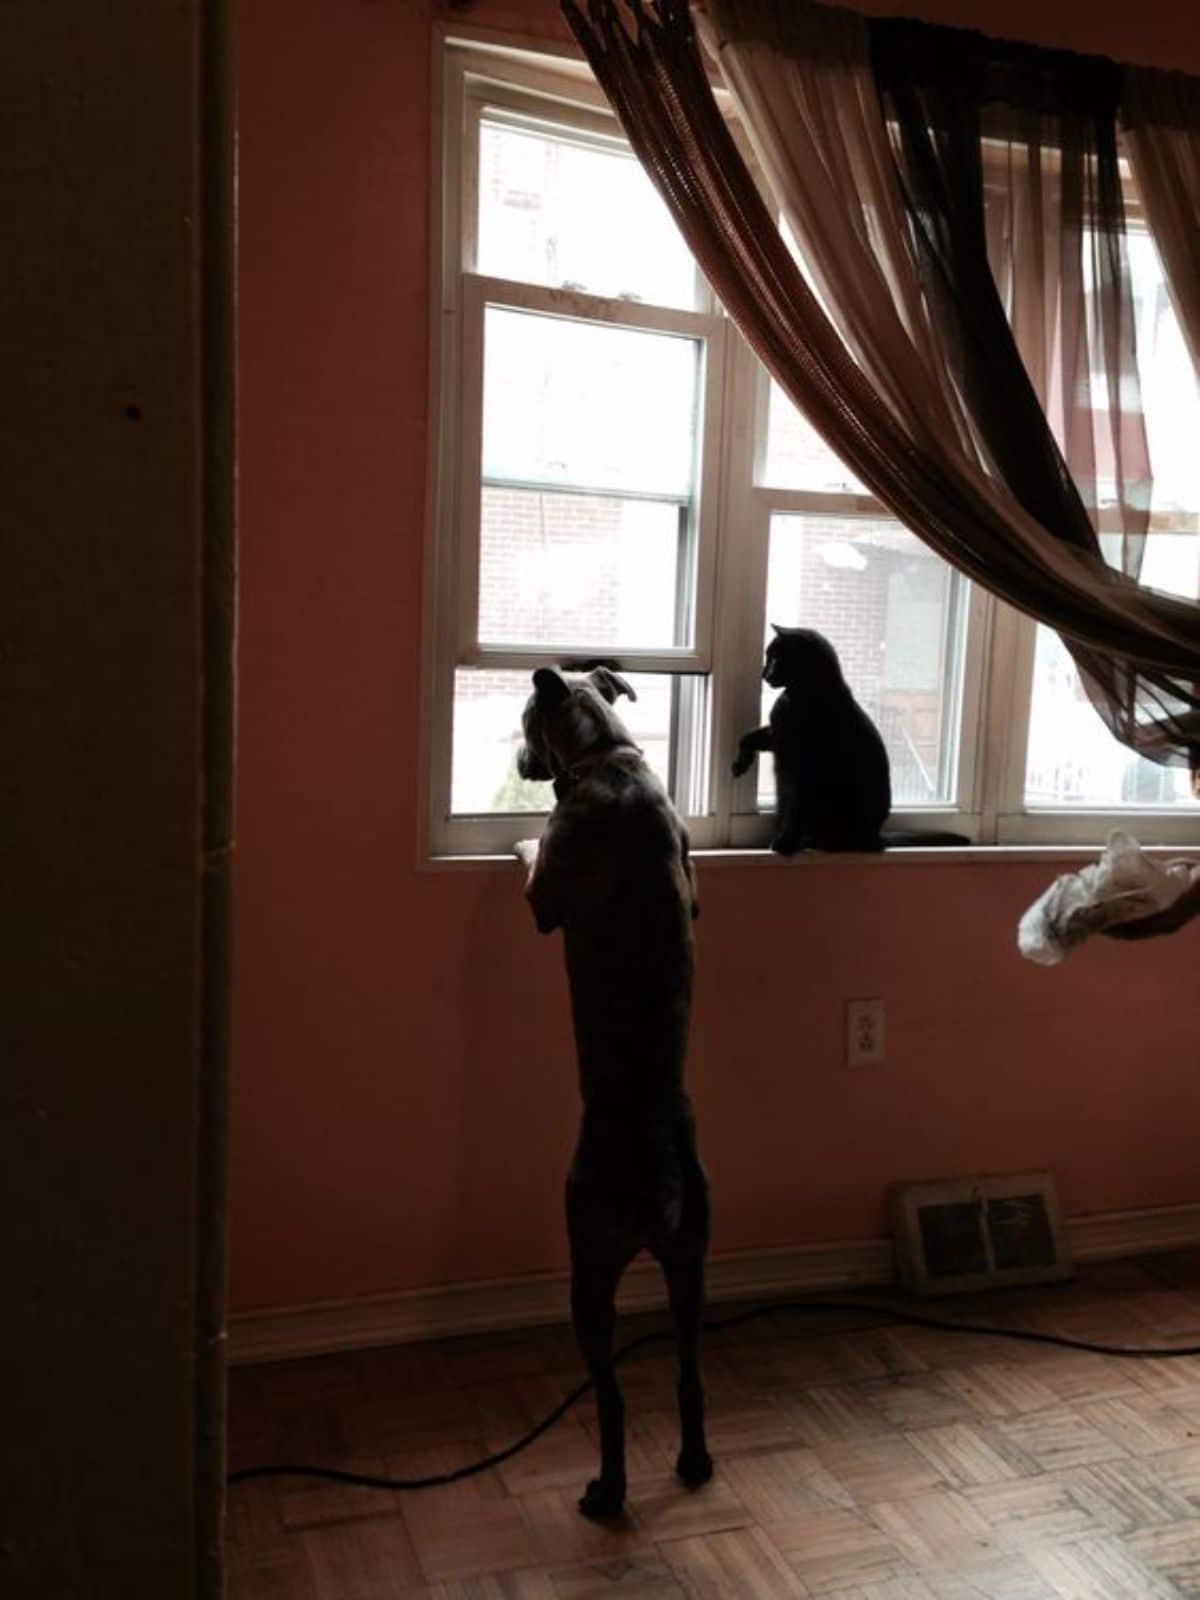 grey dog standing on hind legs and looking out of a window next to a black cat sitting on the window sill